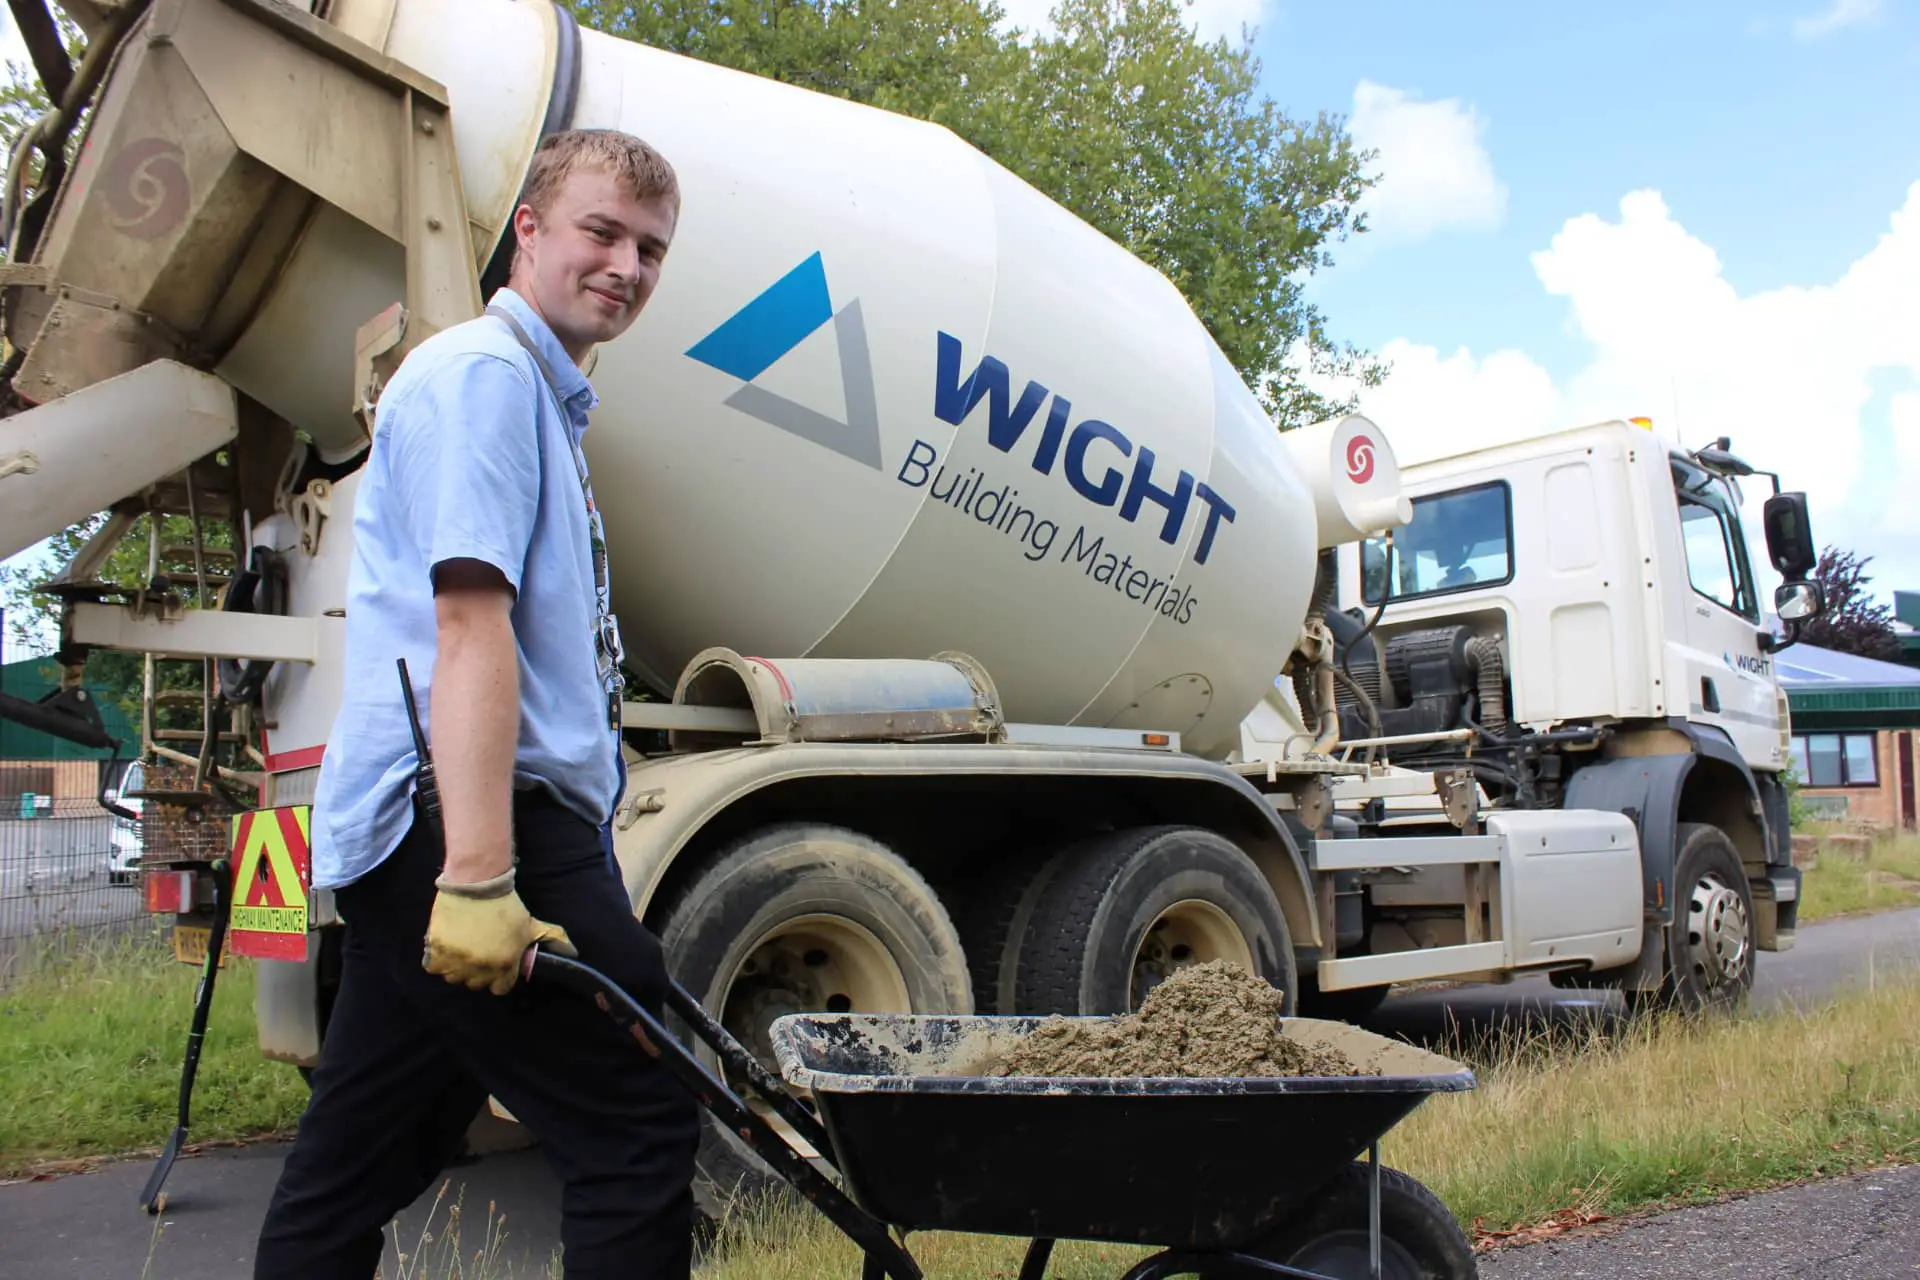 Receiving the free concrete from Wight Building Materials